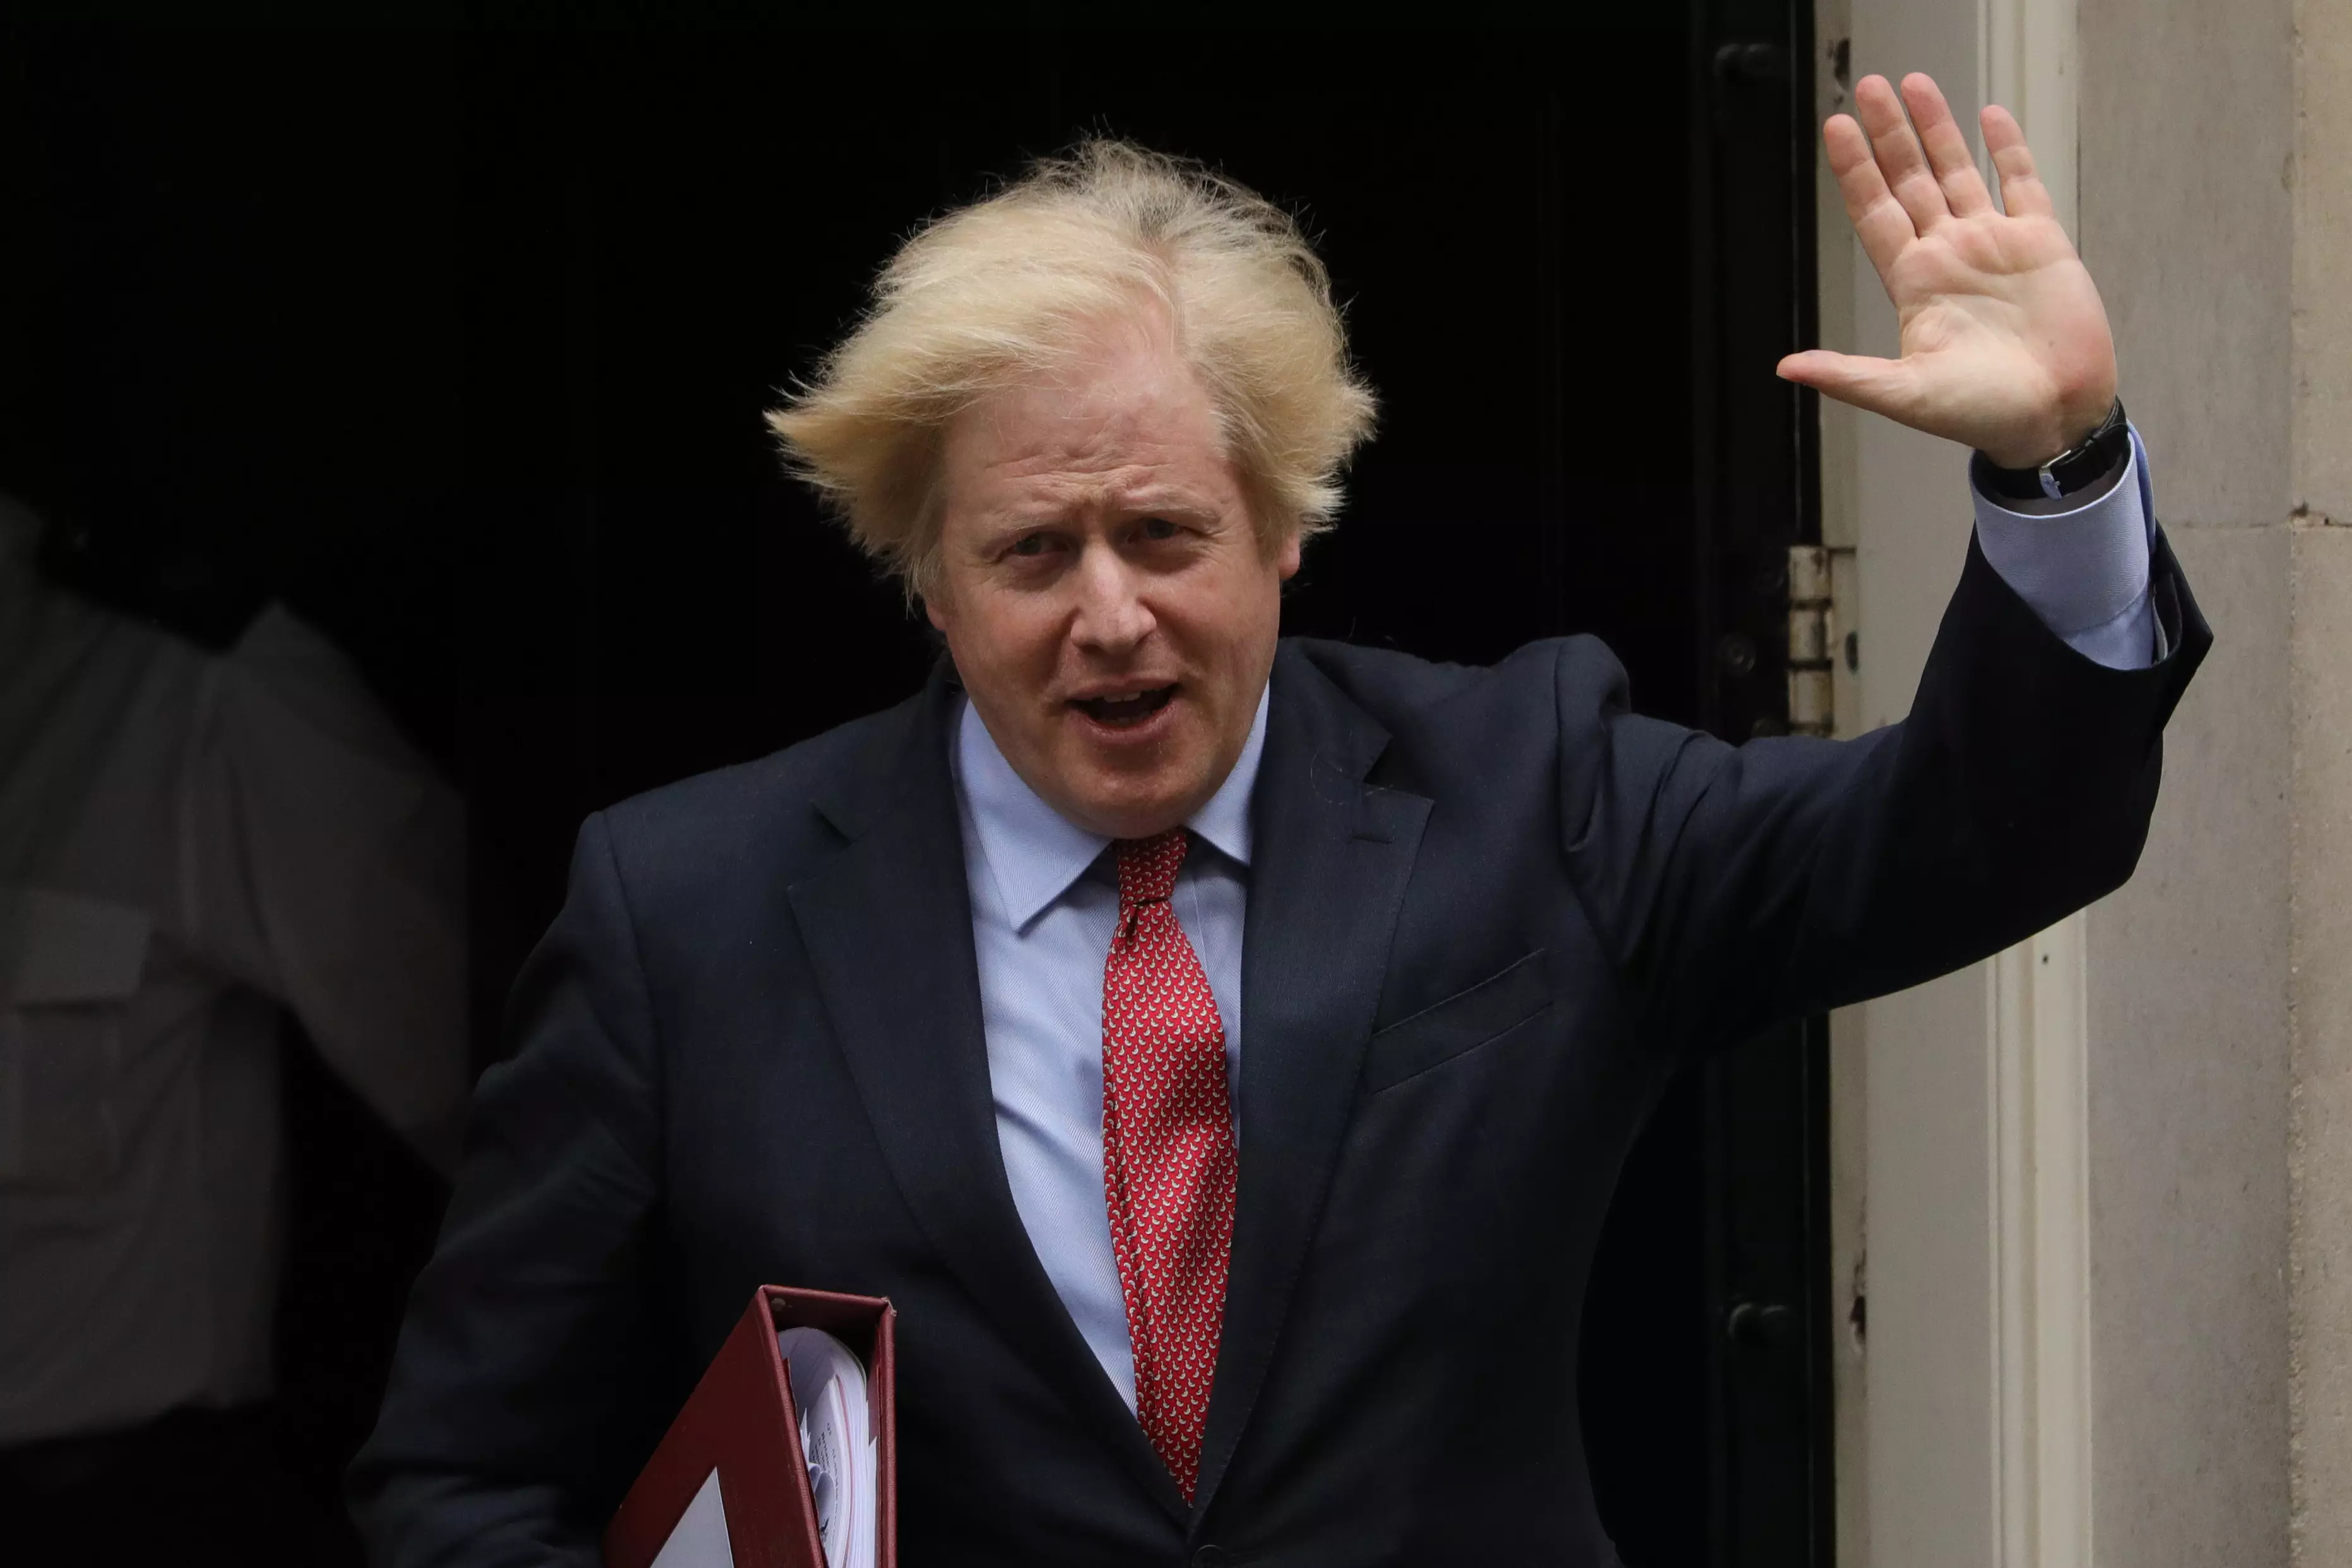 Boris Johnson pictured in June after he announced that zoos would be allowed to reopen from the 15 June 2020 (